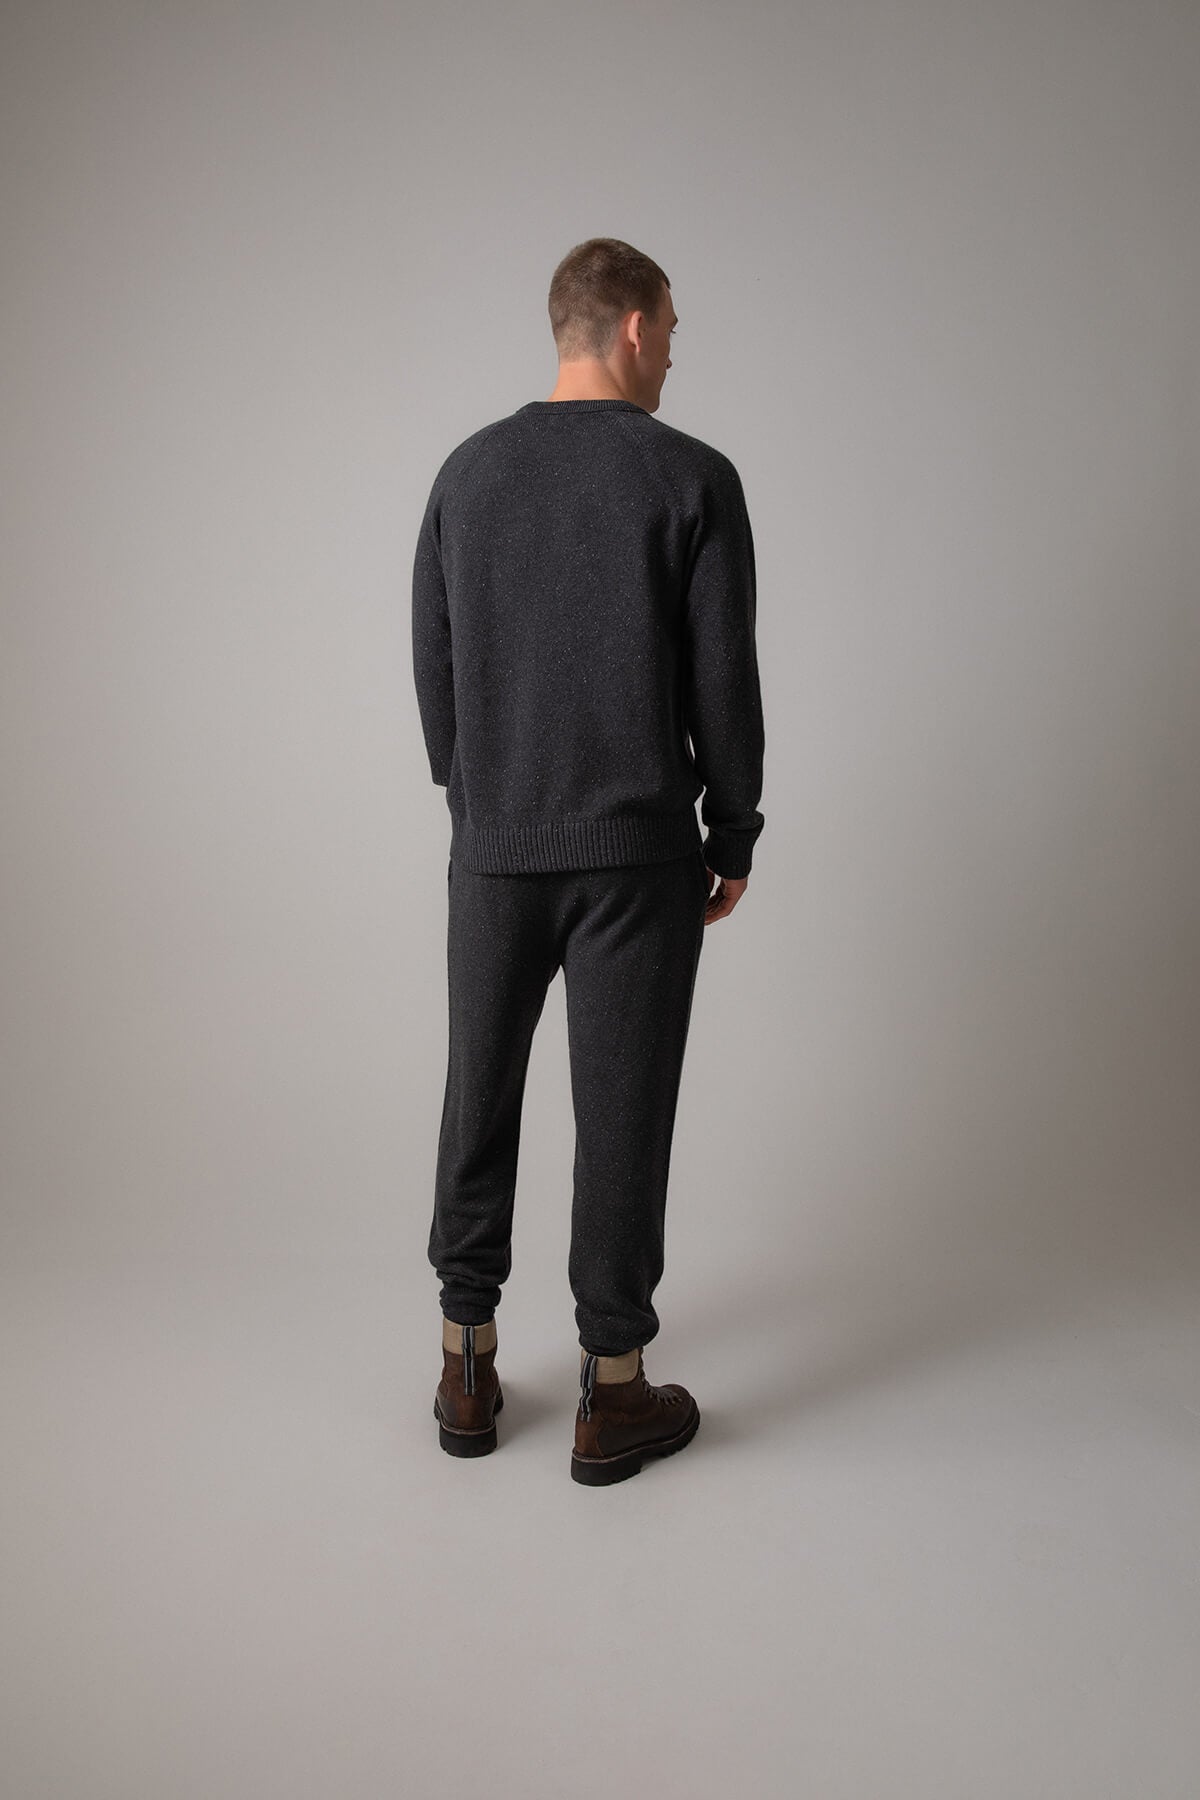 Johnstons of Elgin’s Men's Cashmere Donegal Joggers in Charcoal grey on model wearing matching grey cashmere jumper on a grey background KAI05146004521